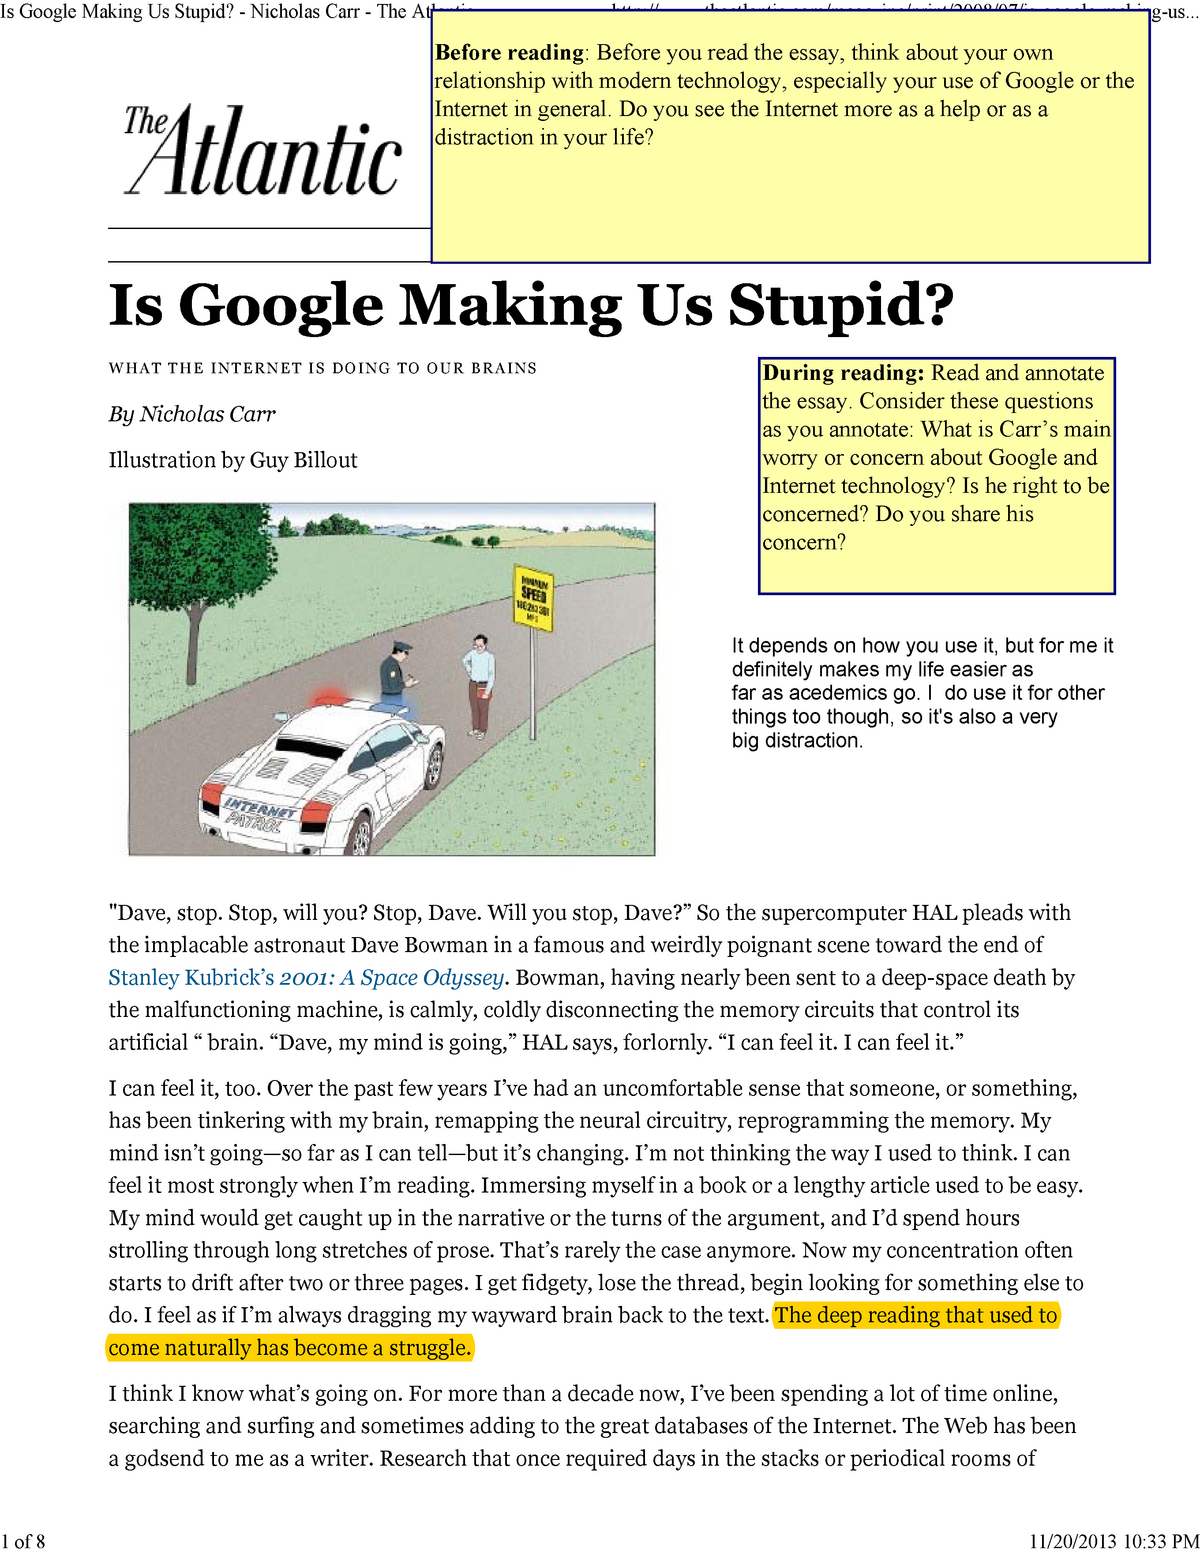 thesis for is google making us stupid